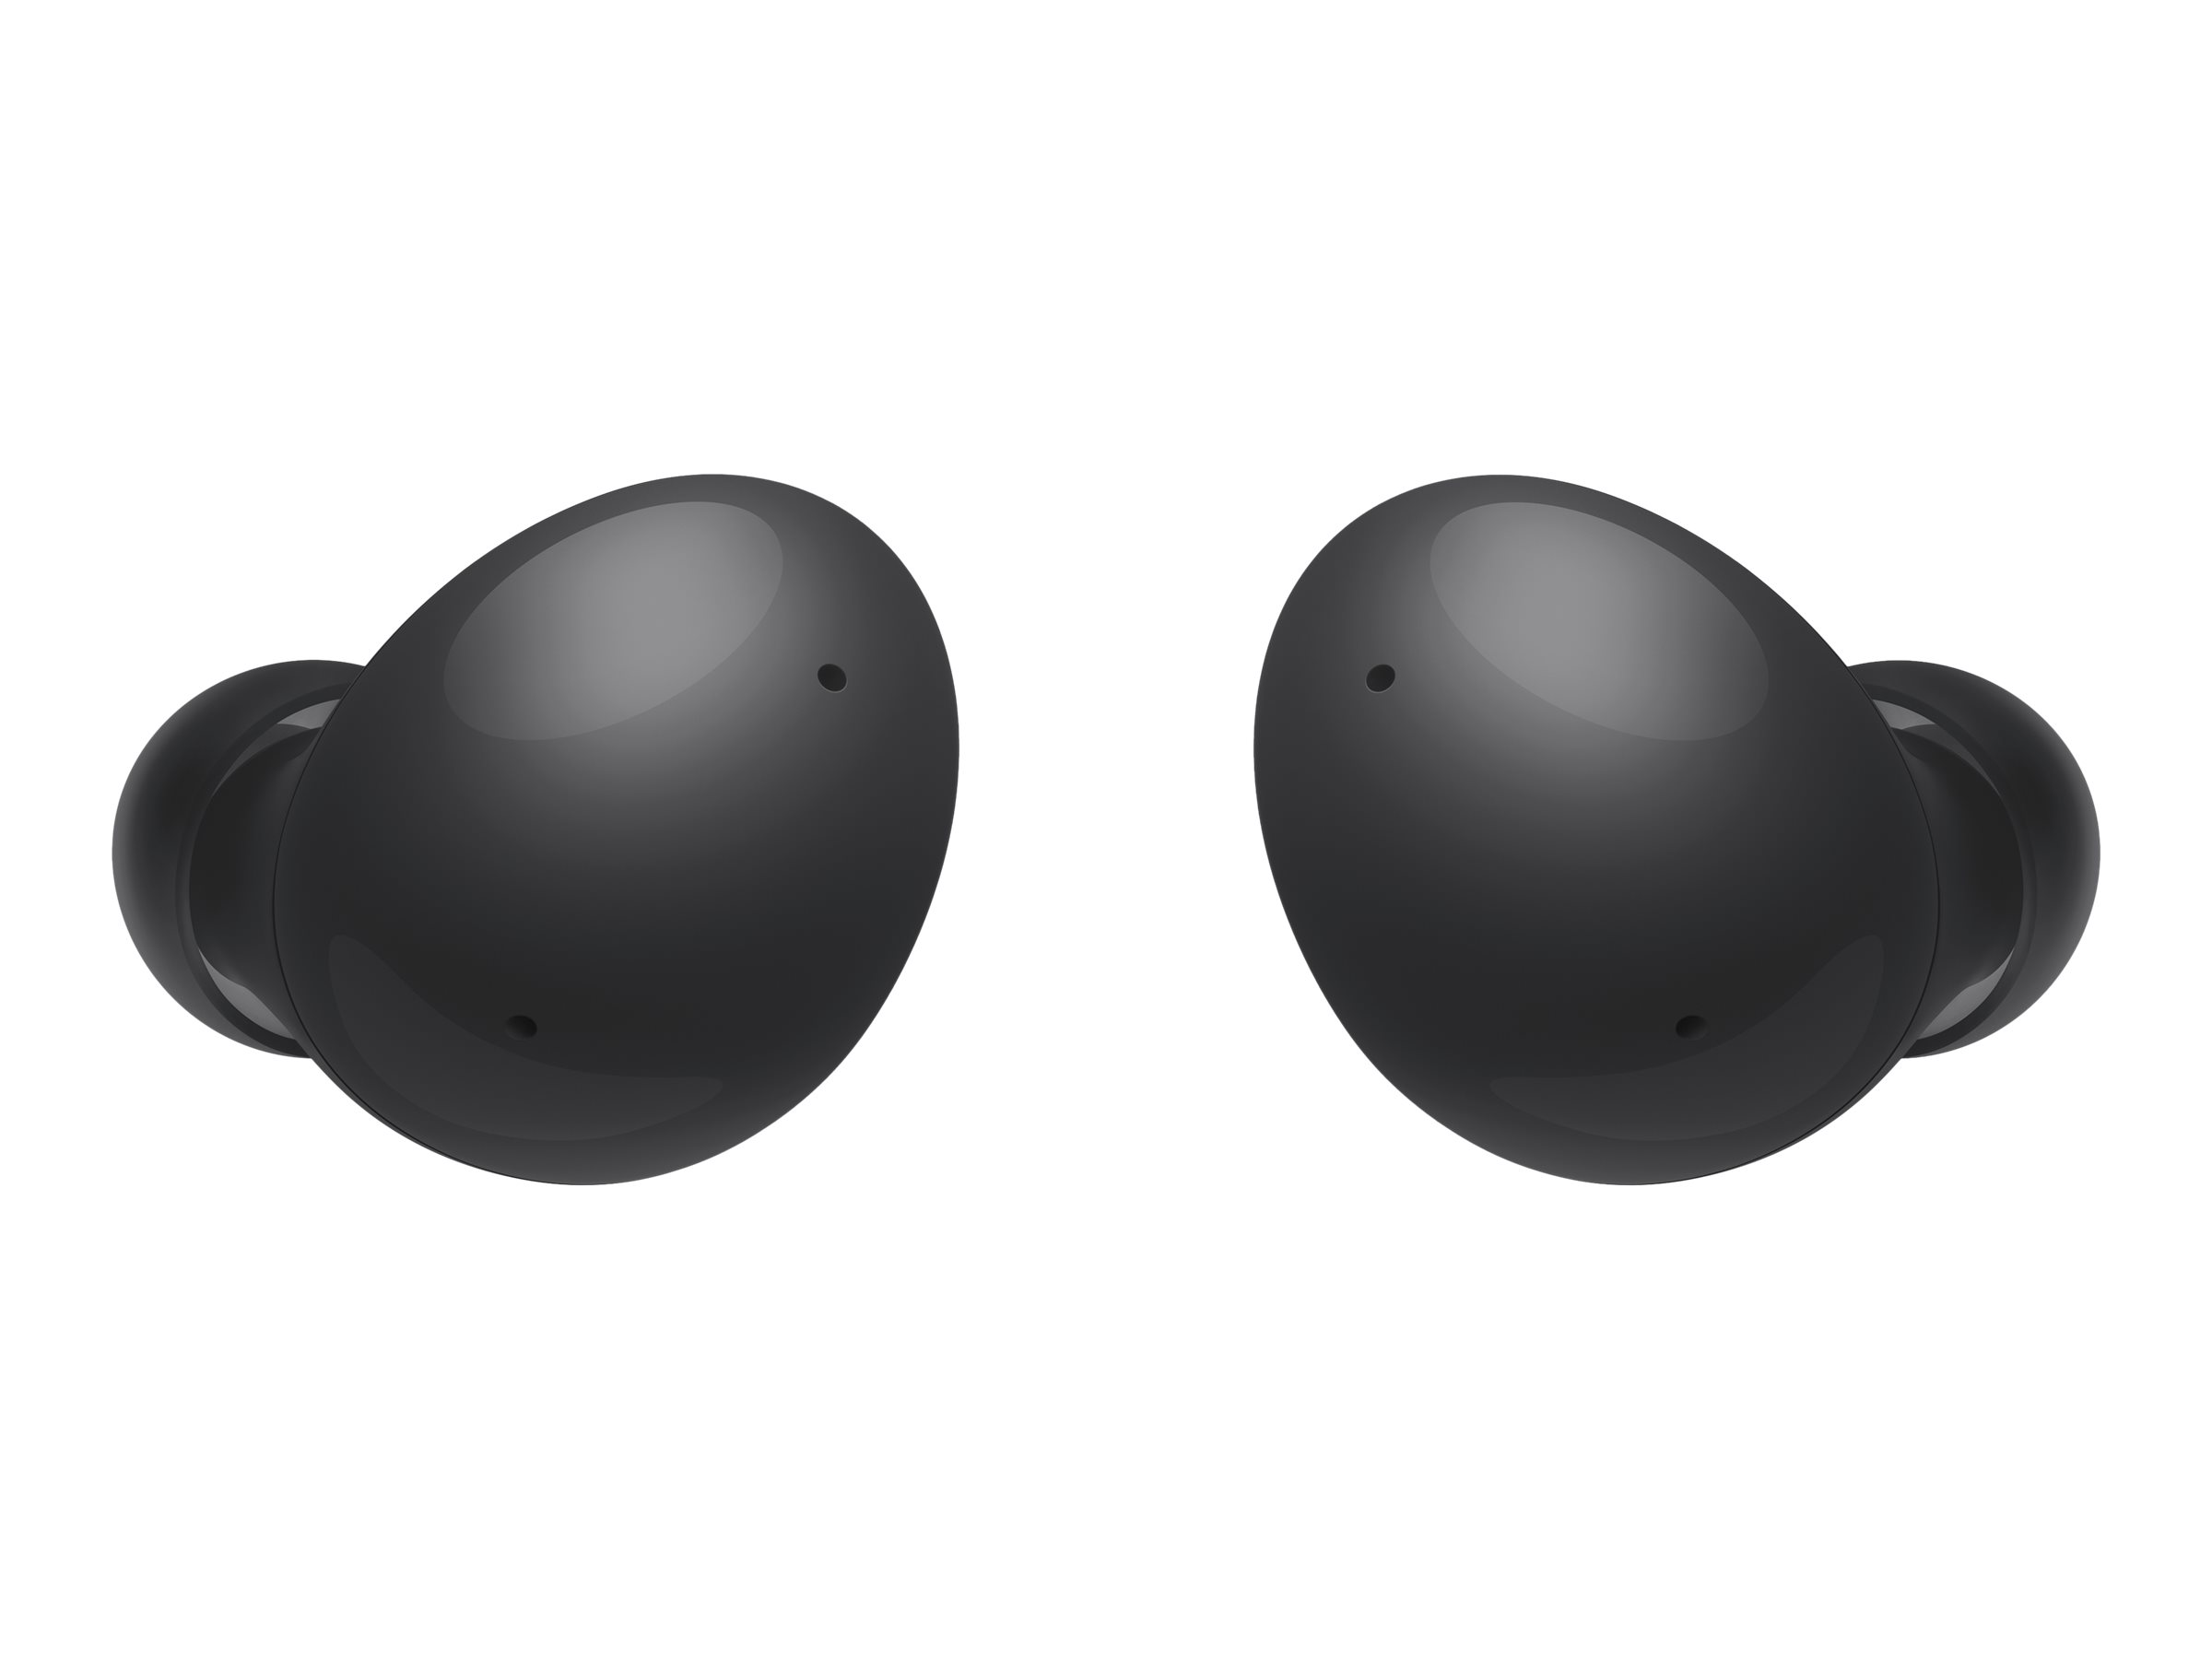 Huawei FreeBuds Pro 2 vs. Samsung Galaxy Buds2: comparison and differences?